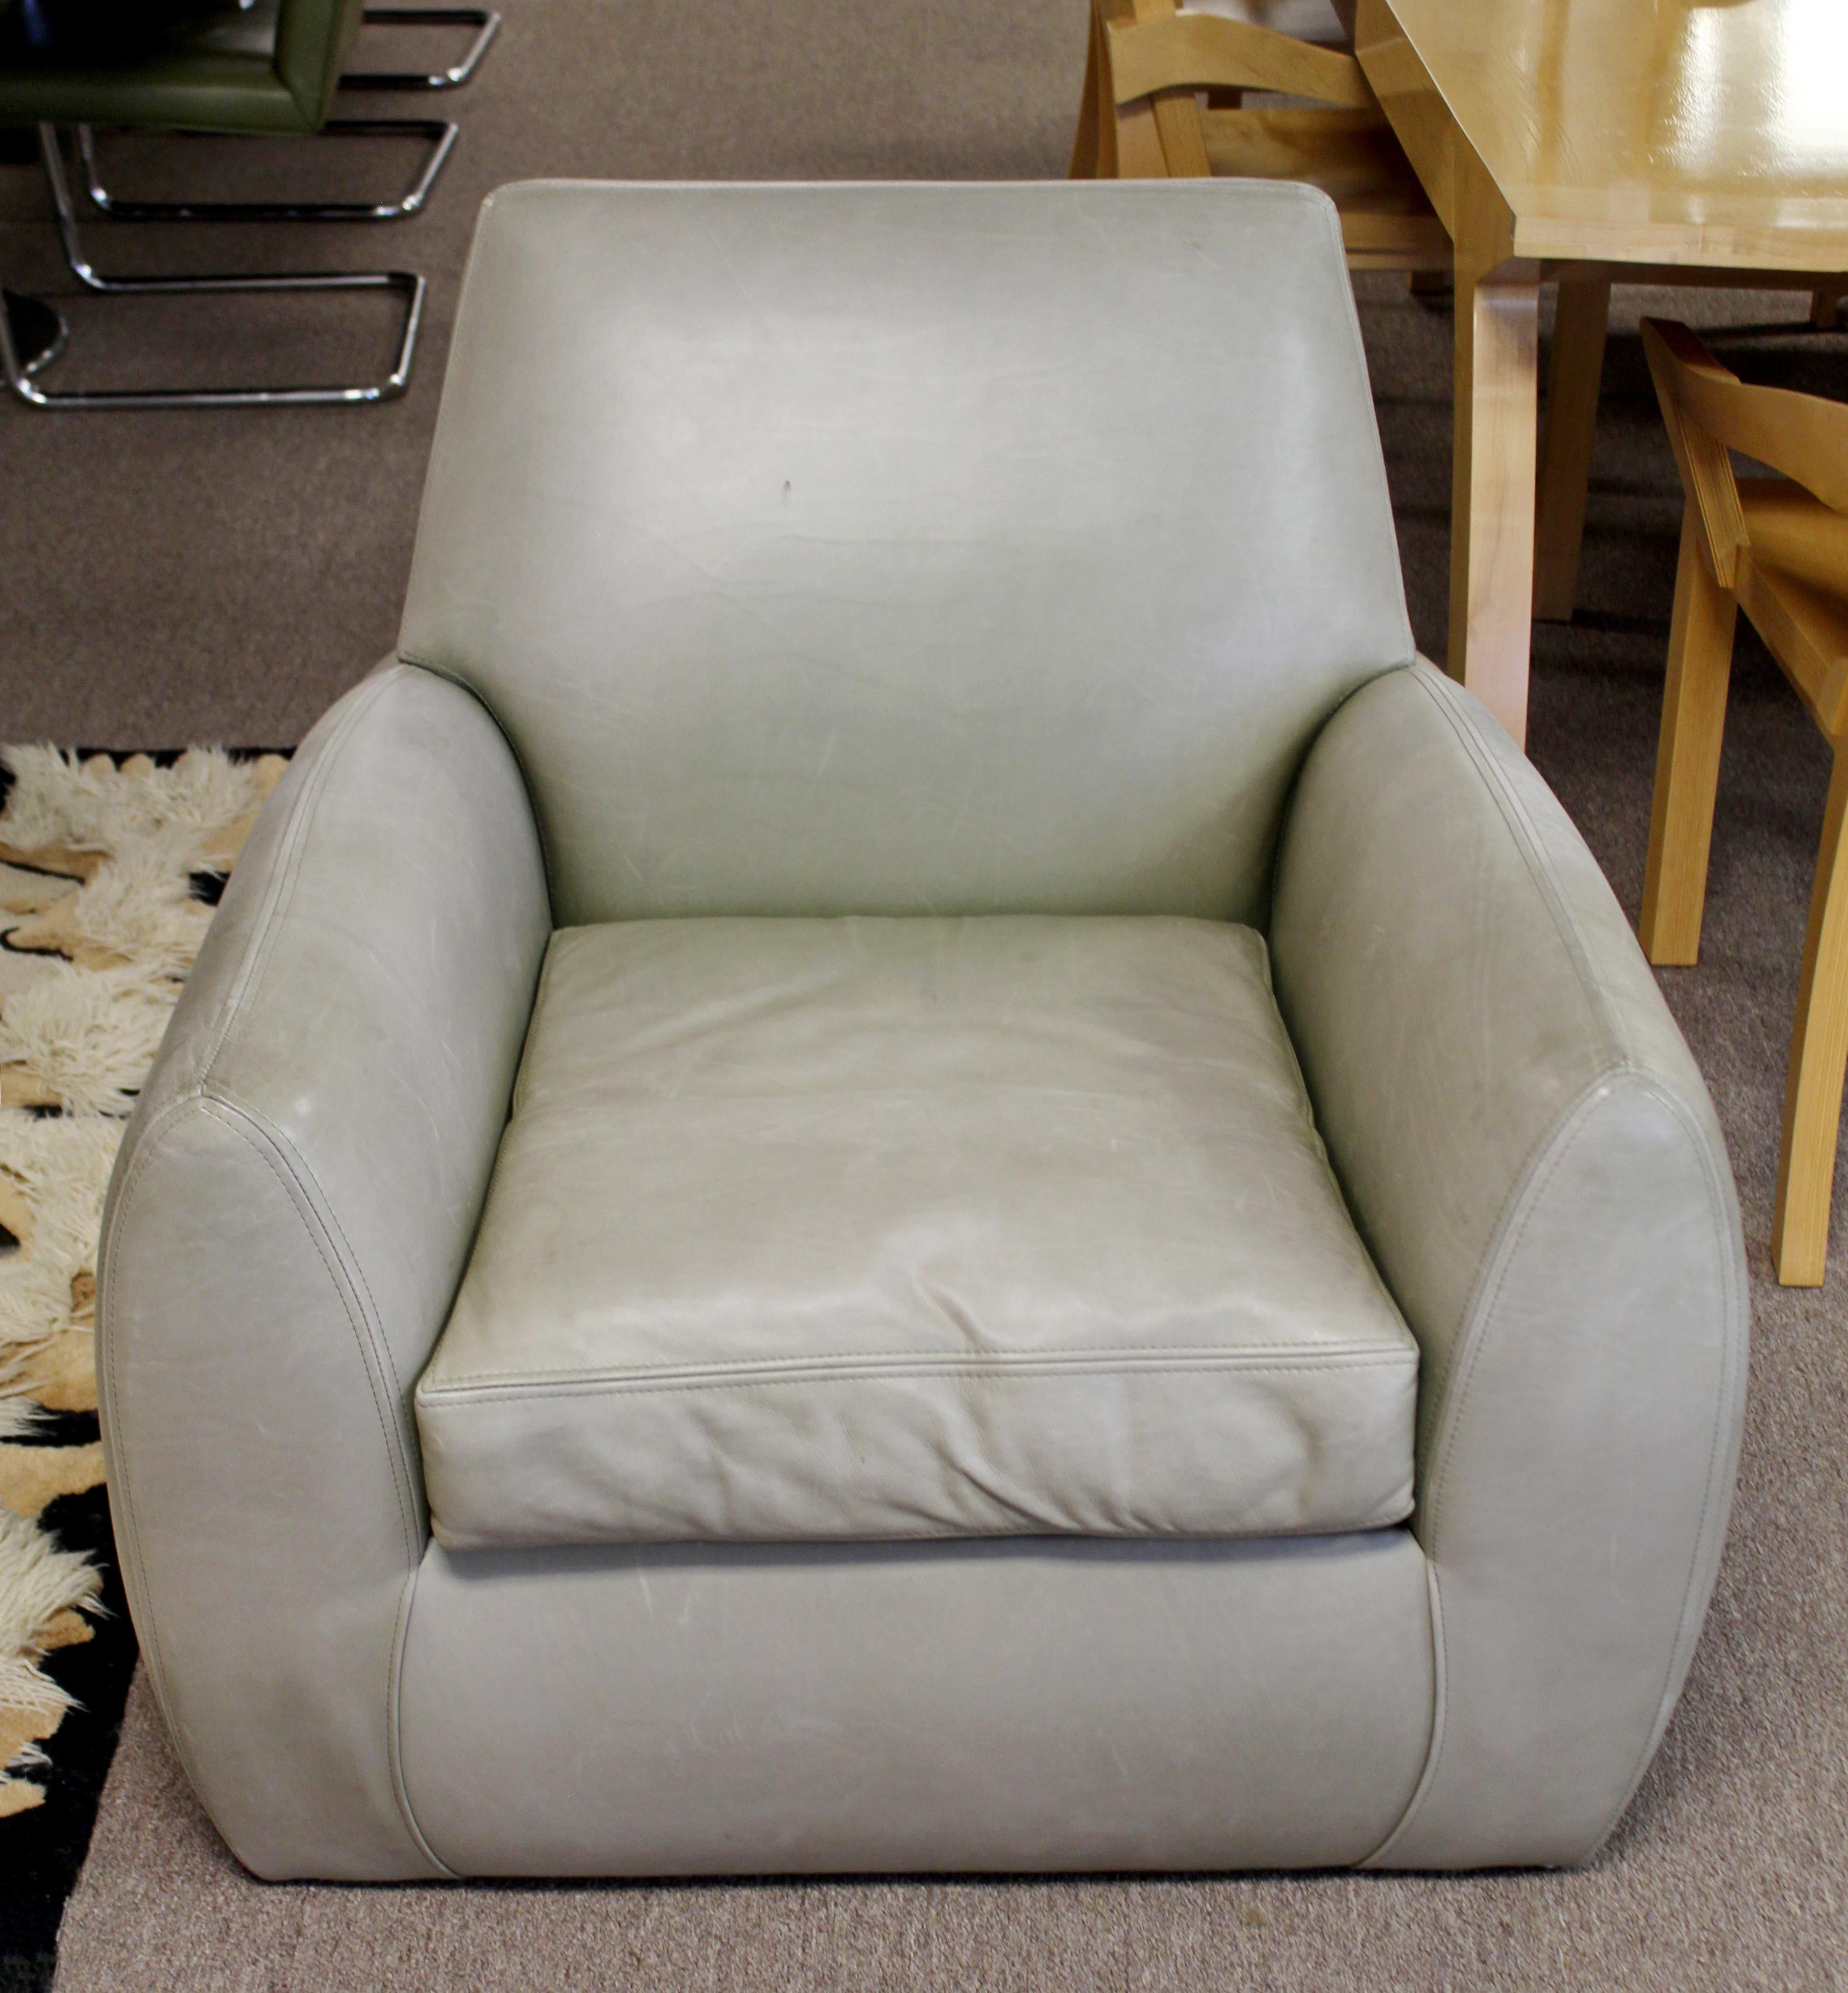 For your consideration is a gorgeous, club lounge armchair upholstered in gray leather, by Dakota Jackson, circa 1980s. In very good vintage condition. The dimensions are 32